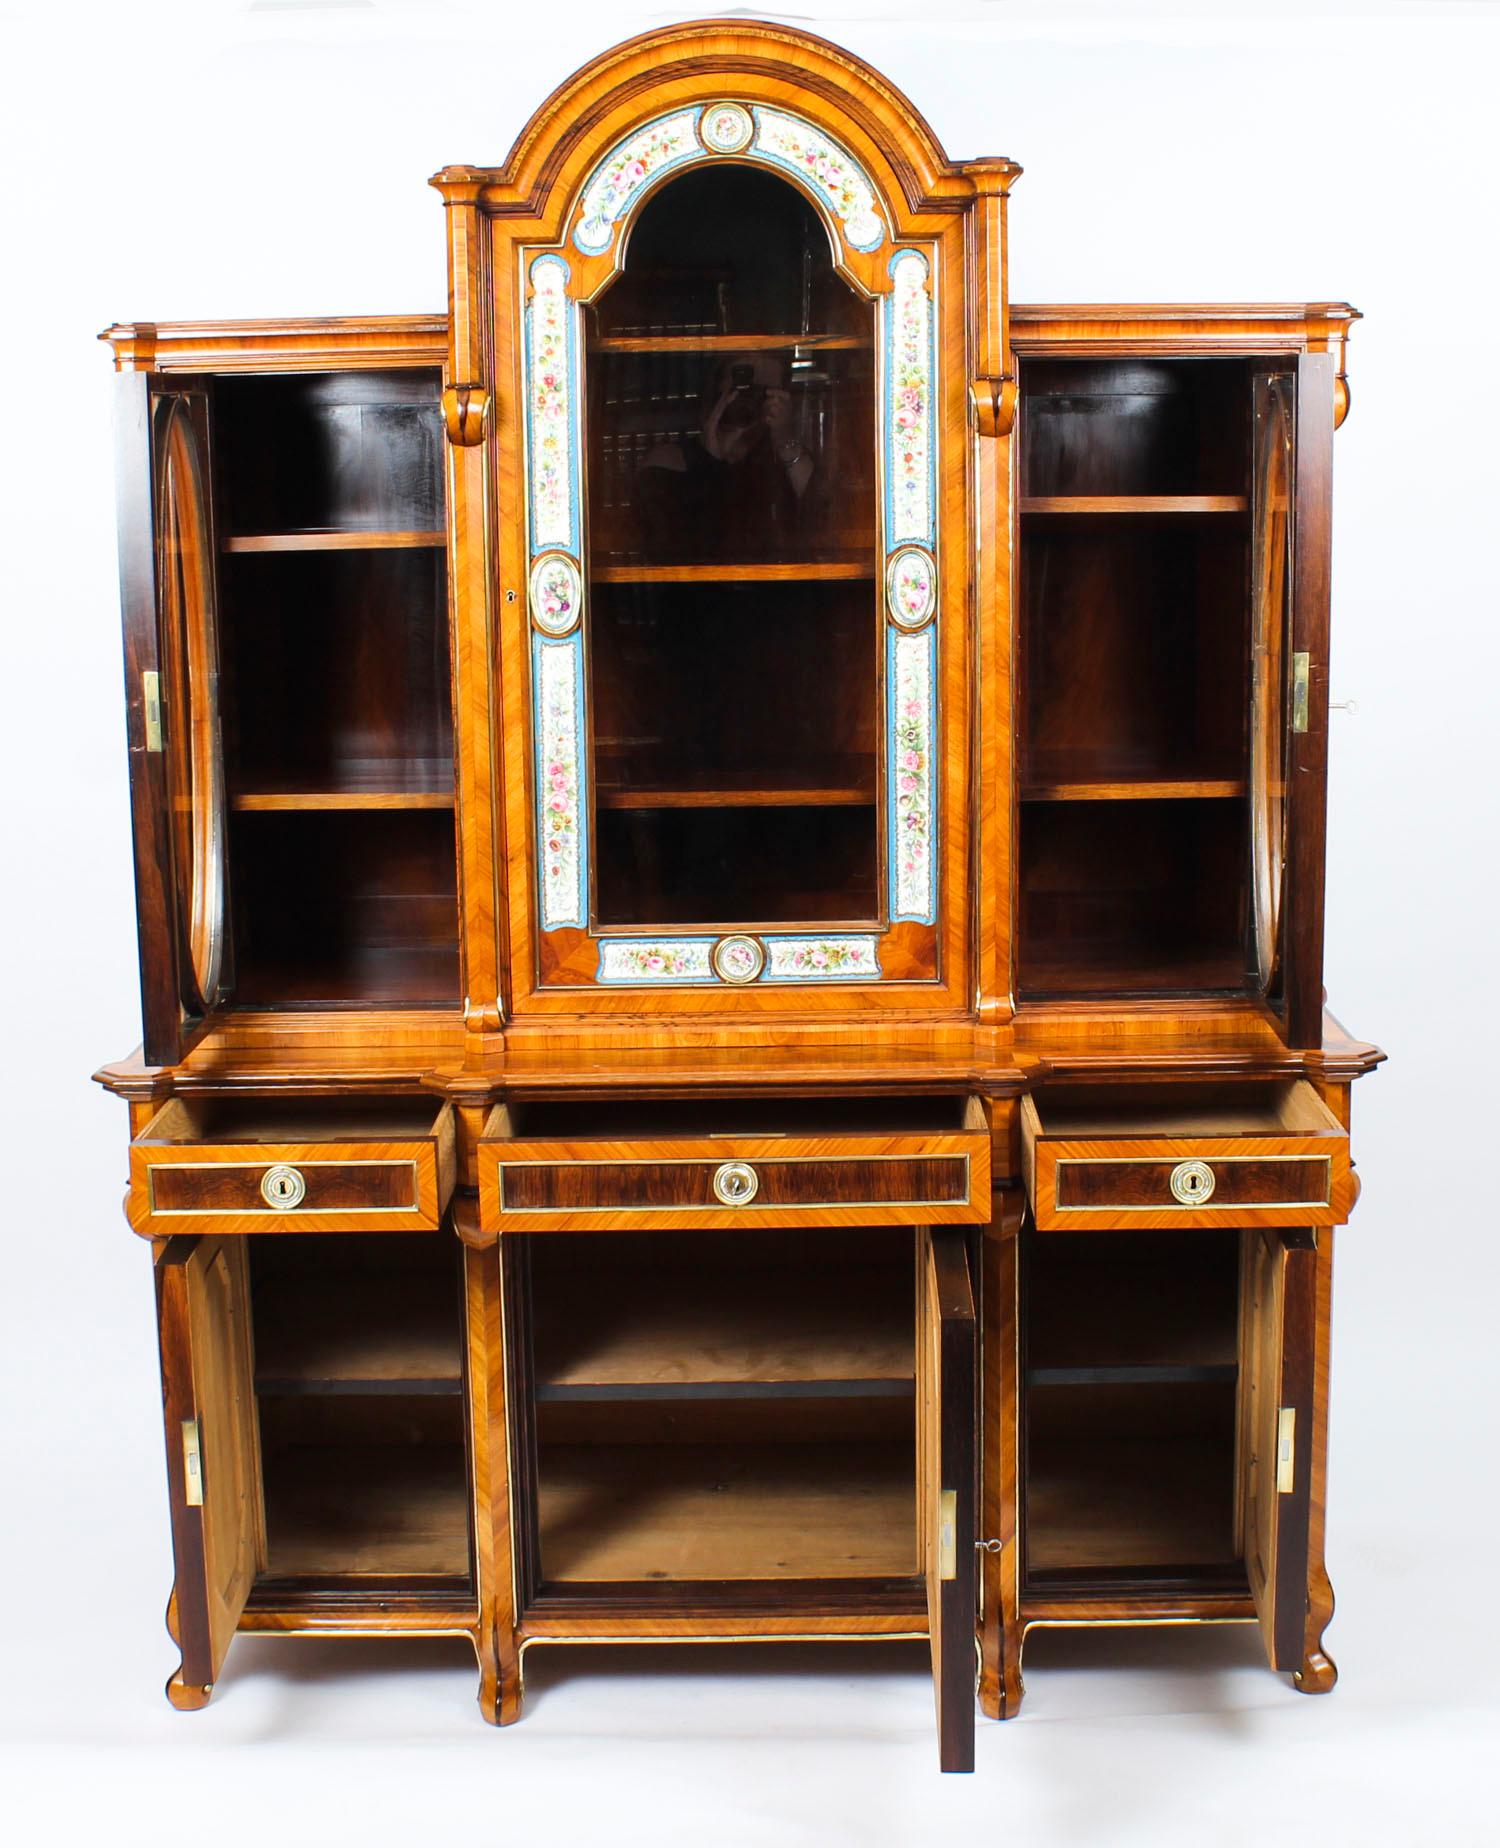 Antique French Walnut and Kingwood Porcelain Mounted Cabinet, 19th Century 7